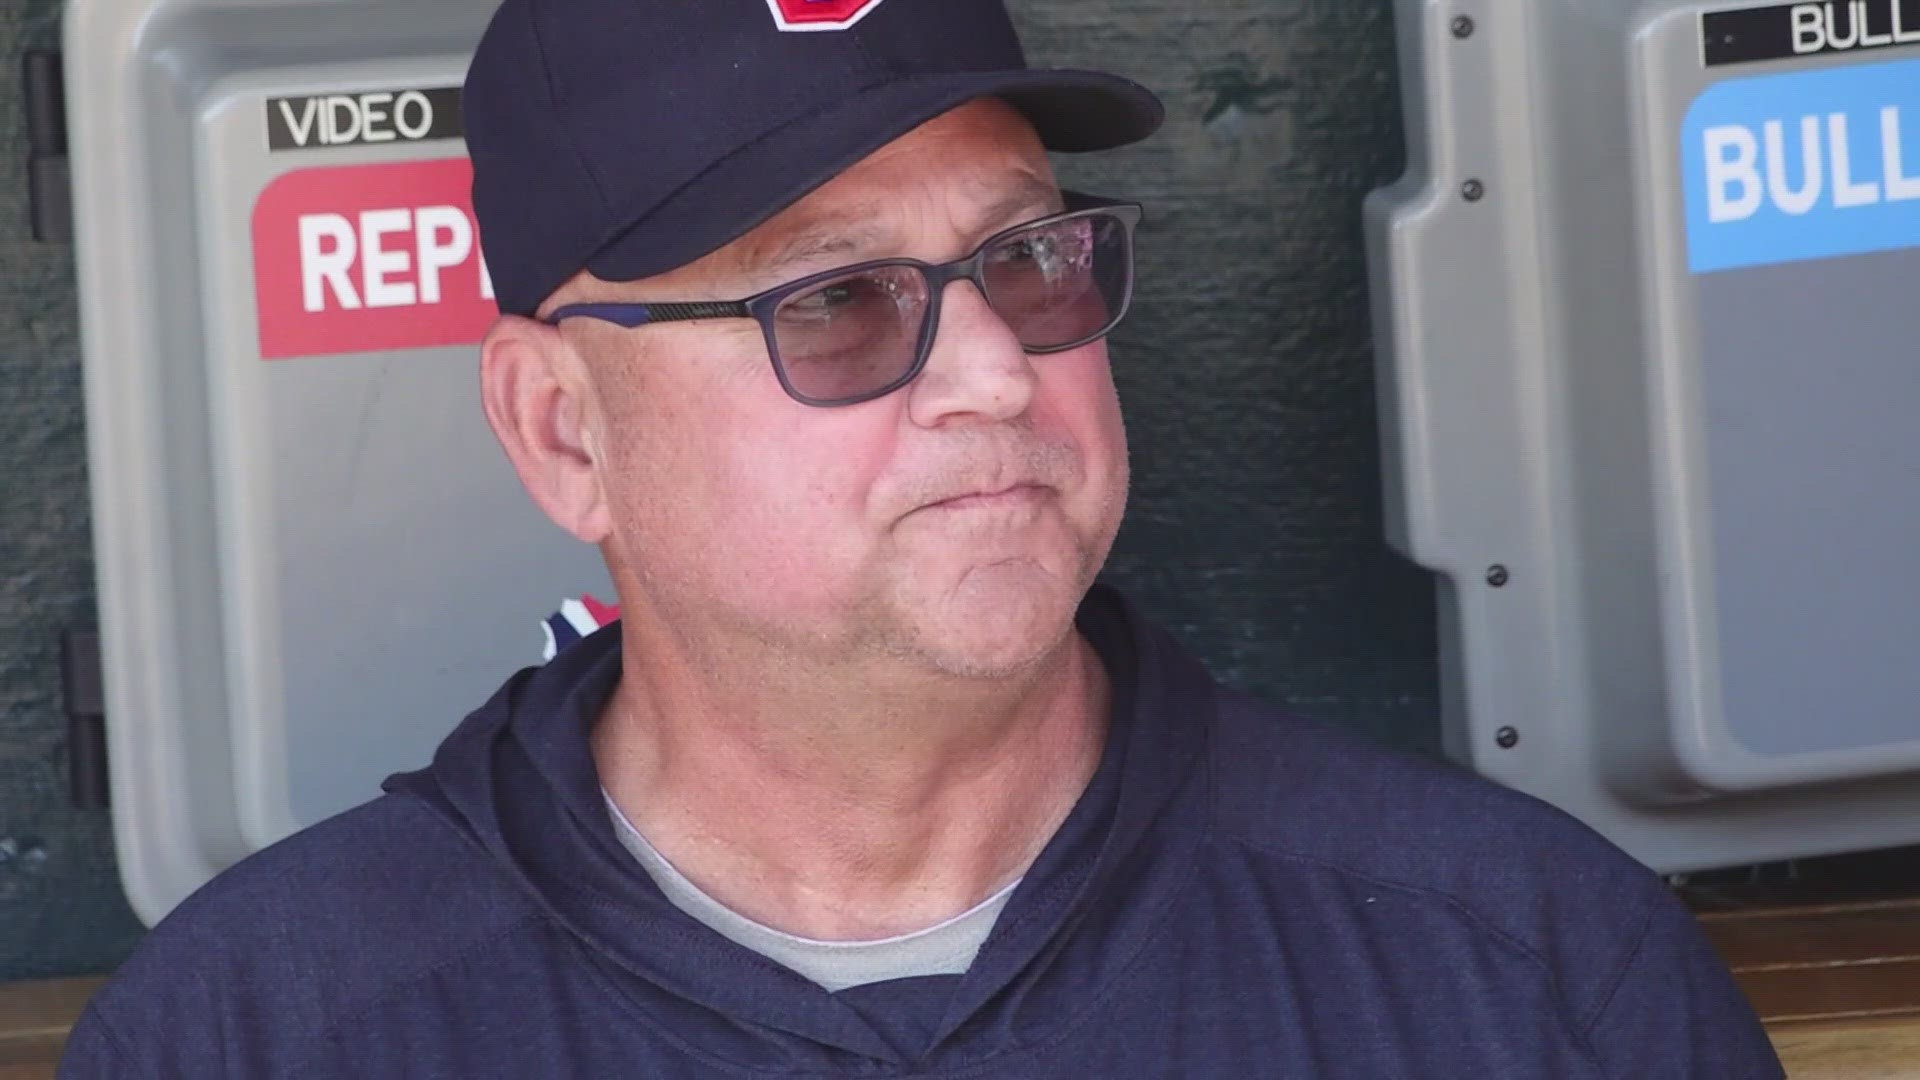 Francona leaves Cleveland after 11 seasons. The Guardians say the 64-year-old will have a role with the team moving forward.